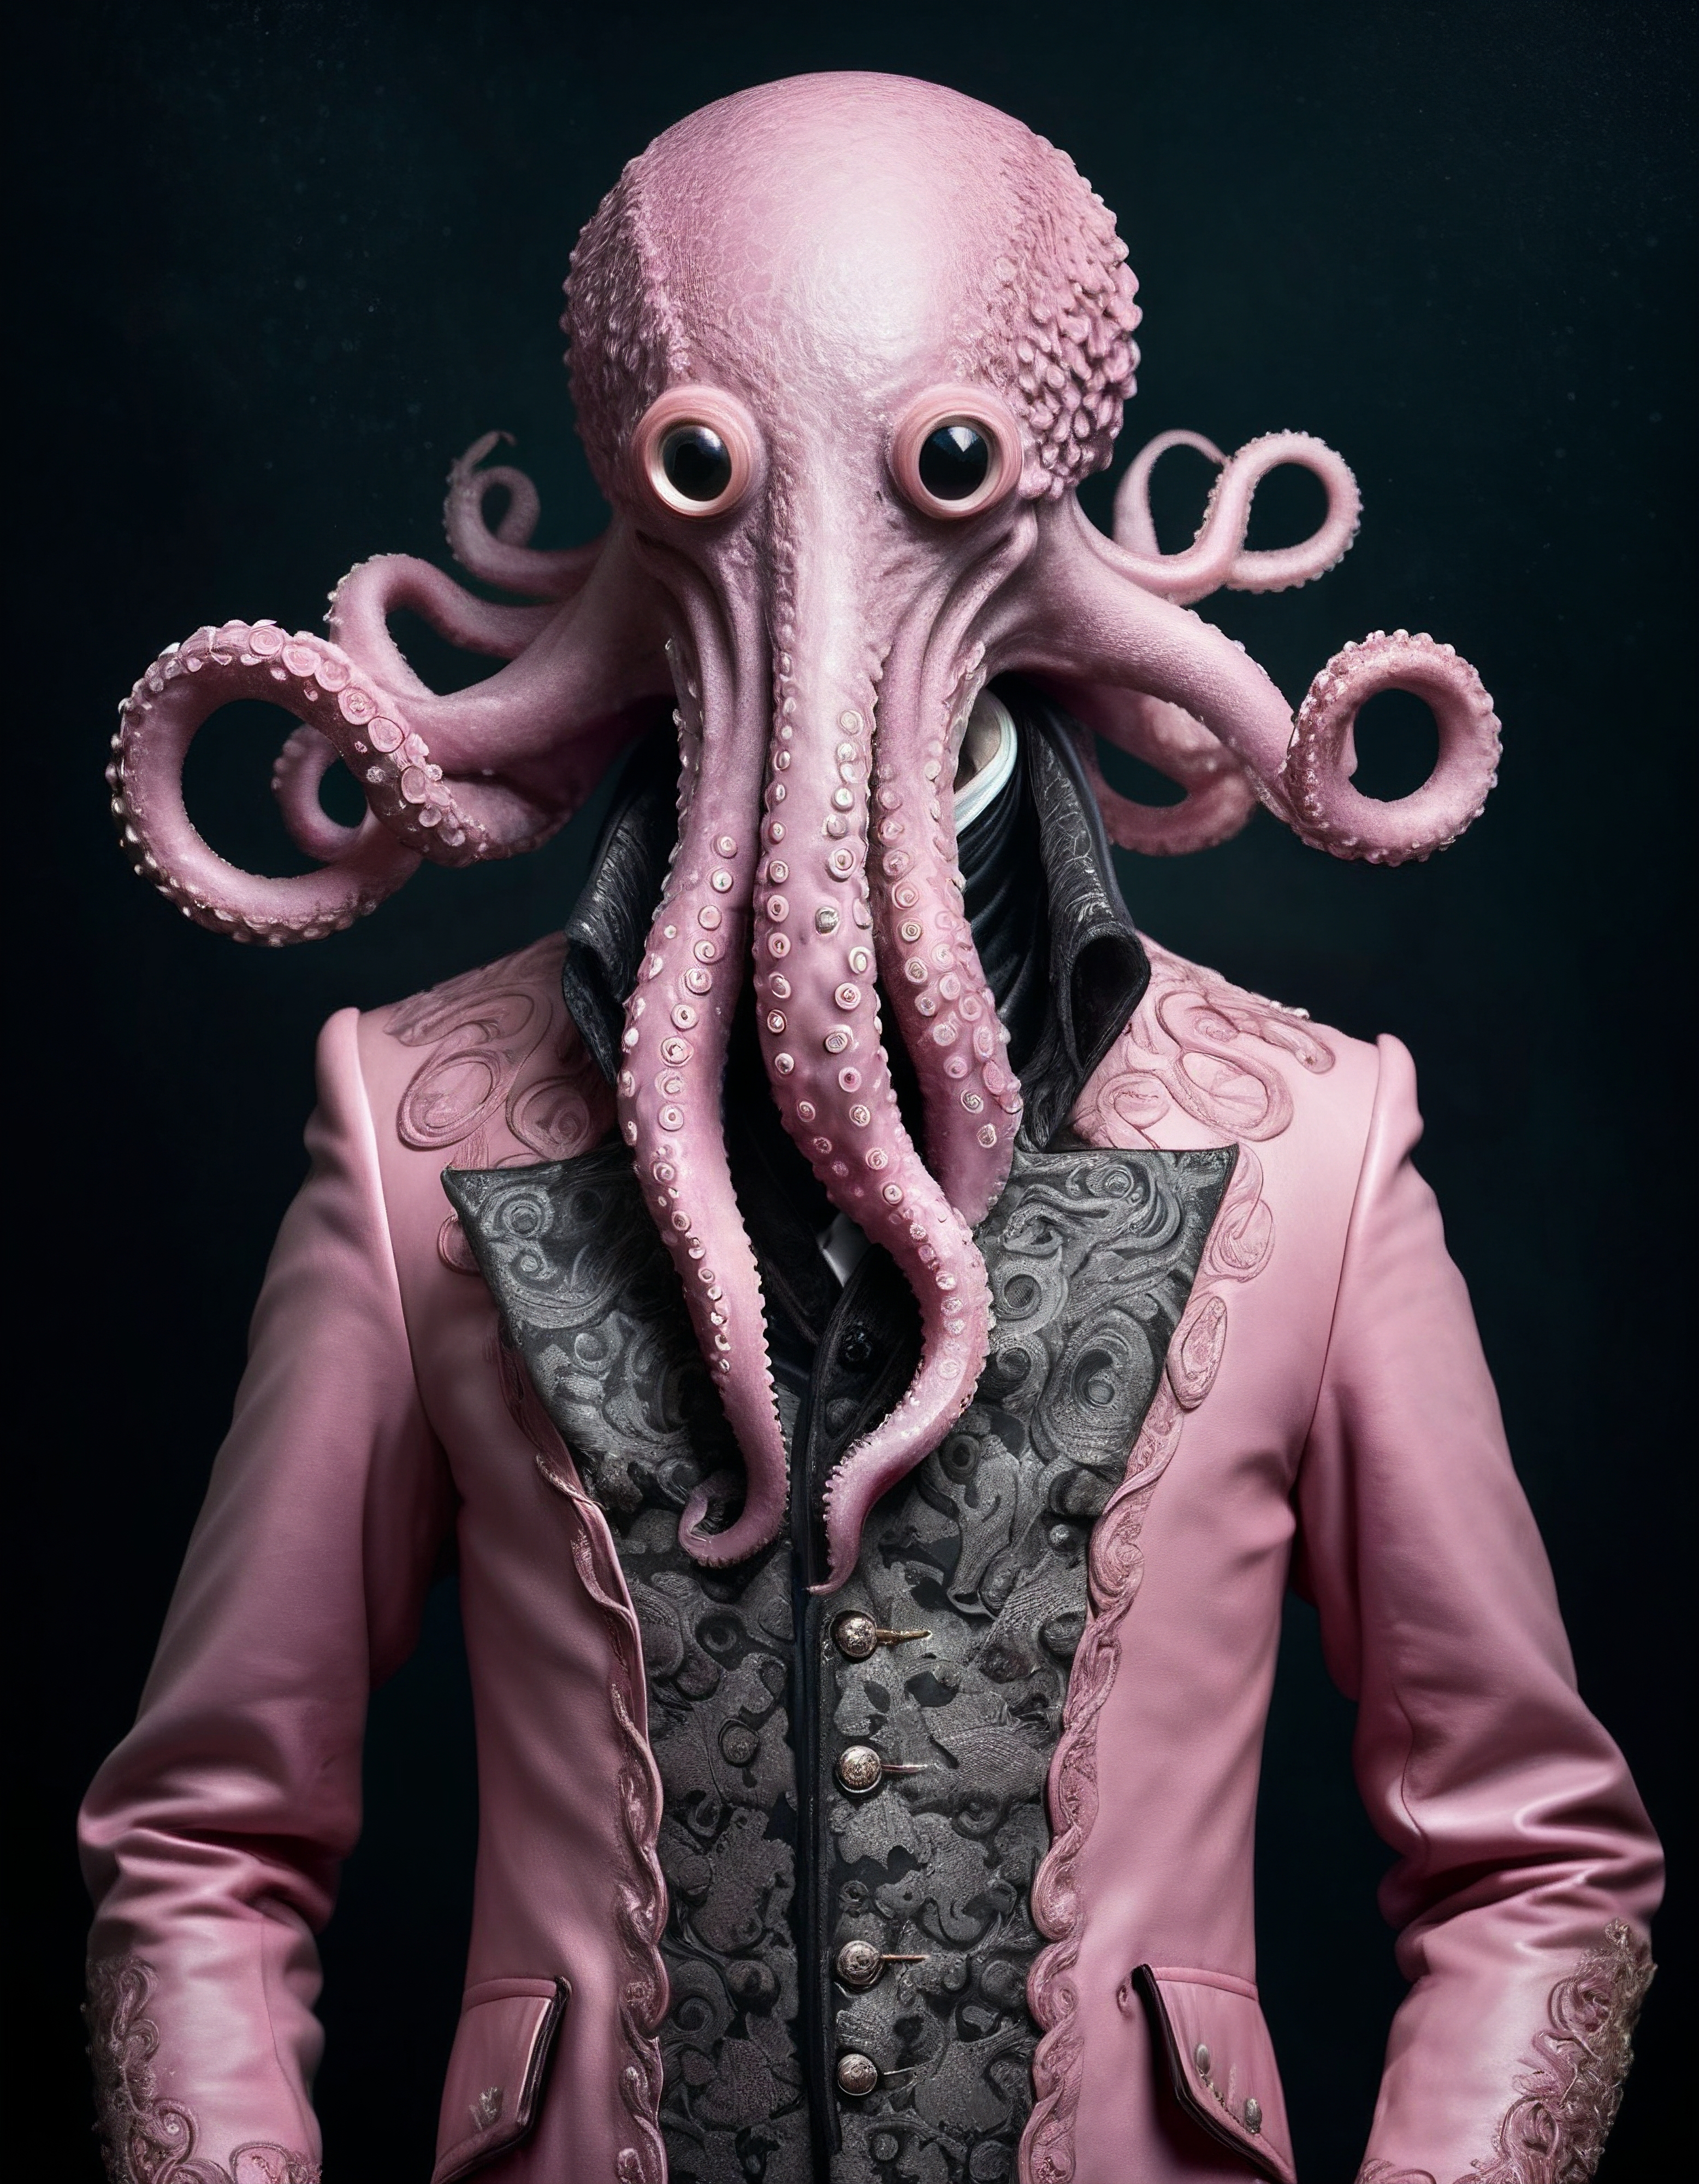 A person wearing a pink suit and a pink headpiece with octopus tentacles as part of the outfit.